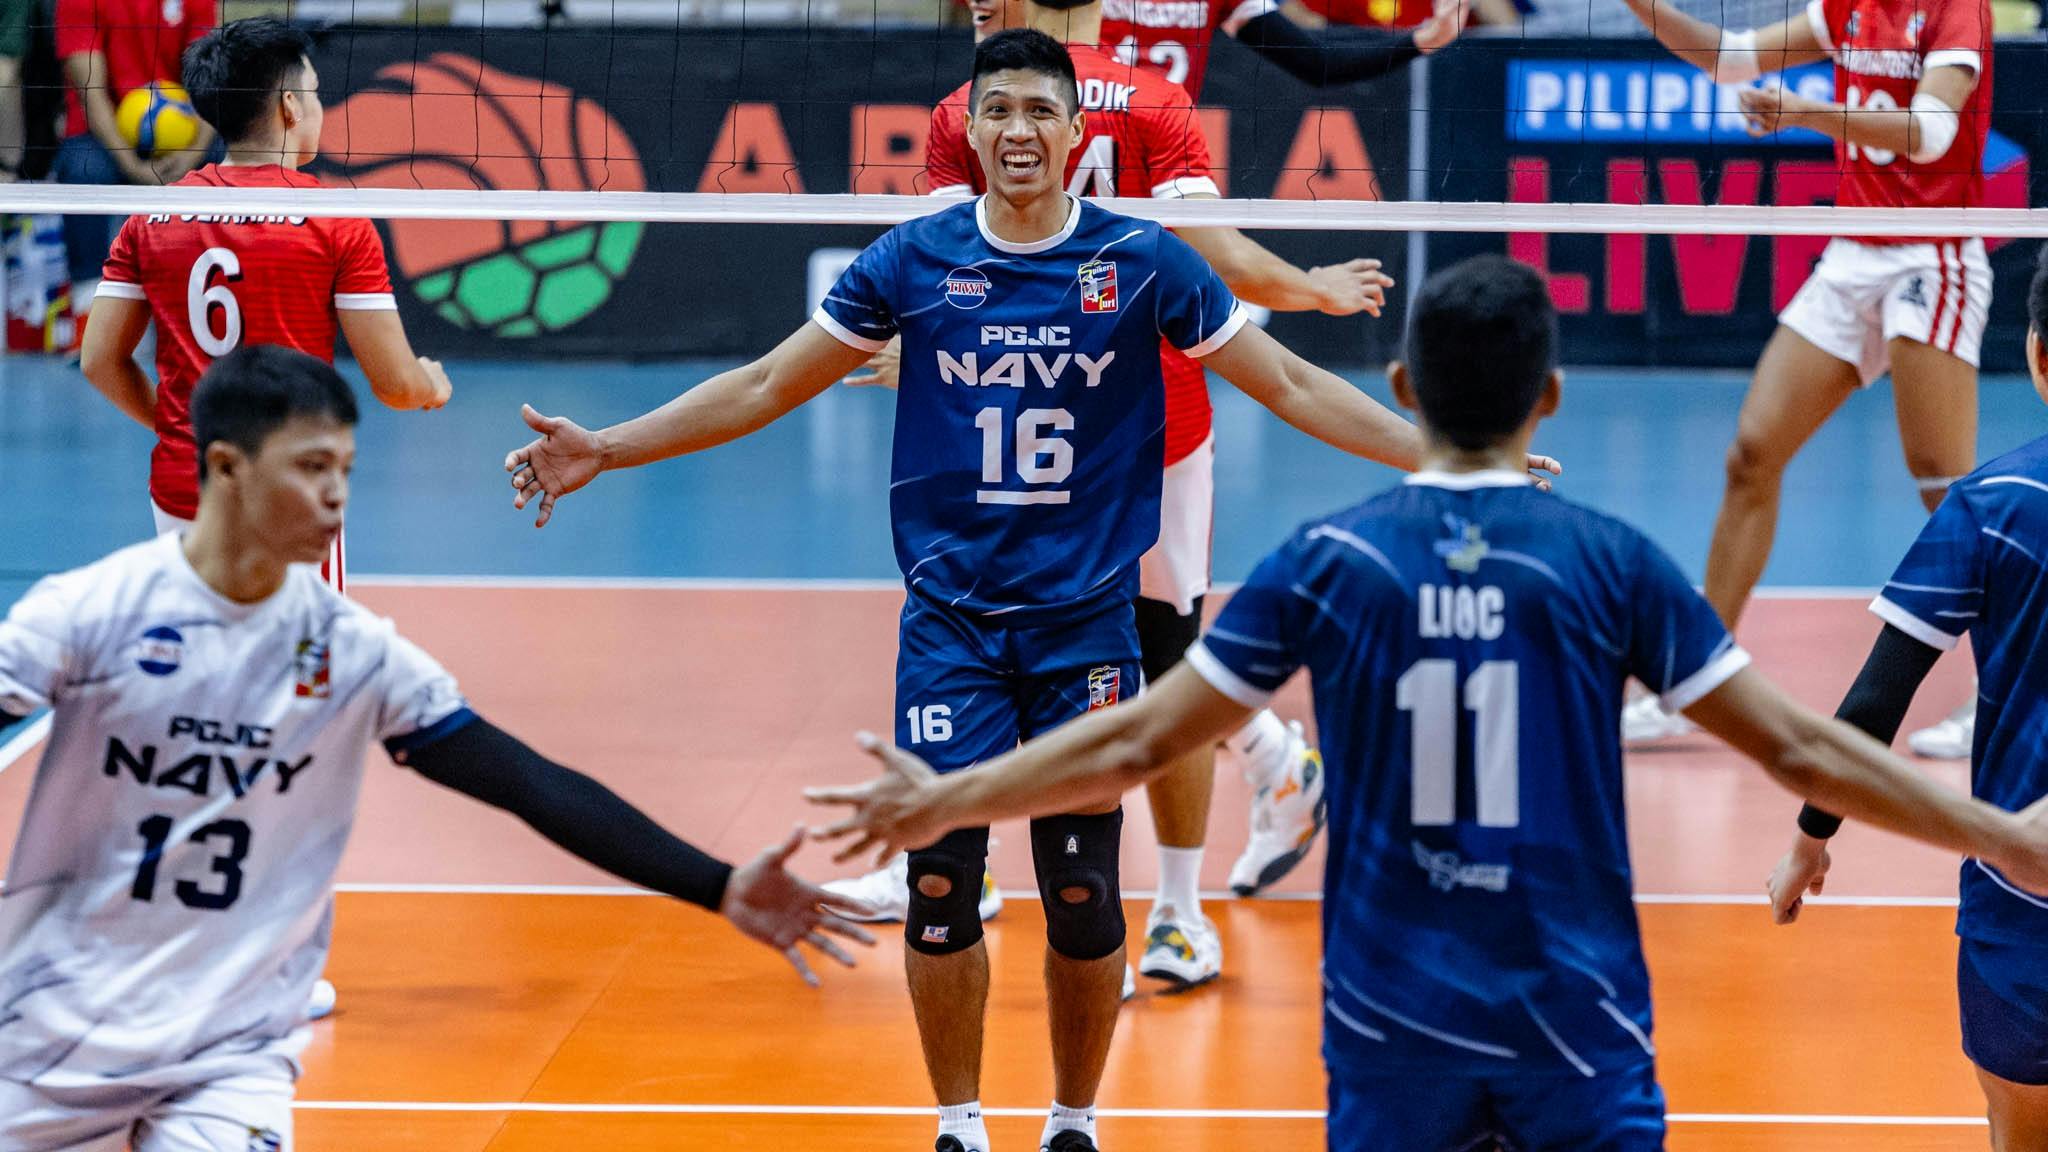 Spikers’ Turf: Greg Dolor pours 30 points as PGJC-Navy sends D’Navigators to the brink